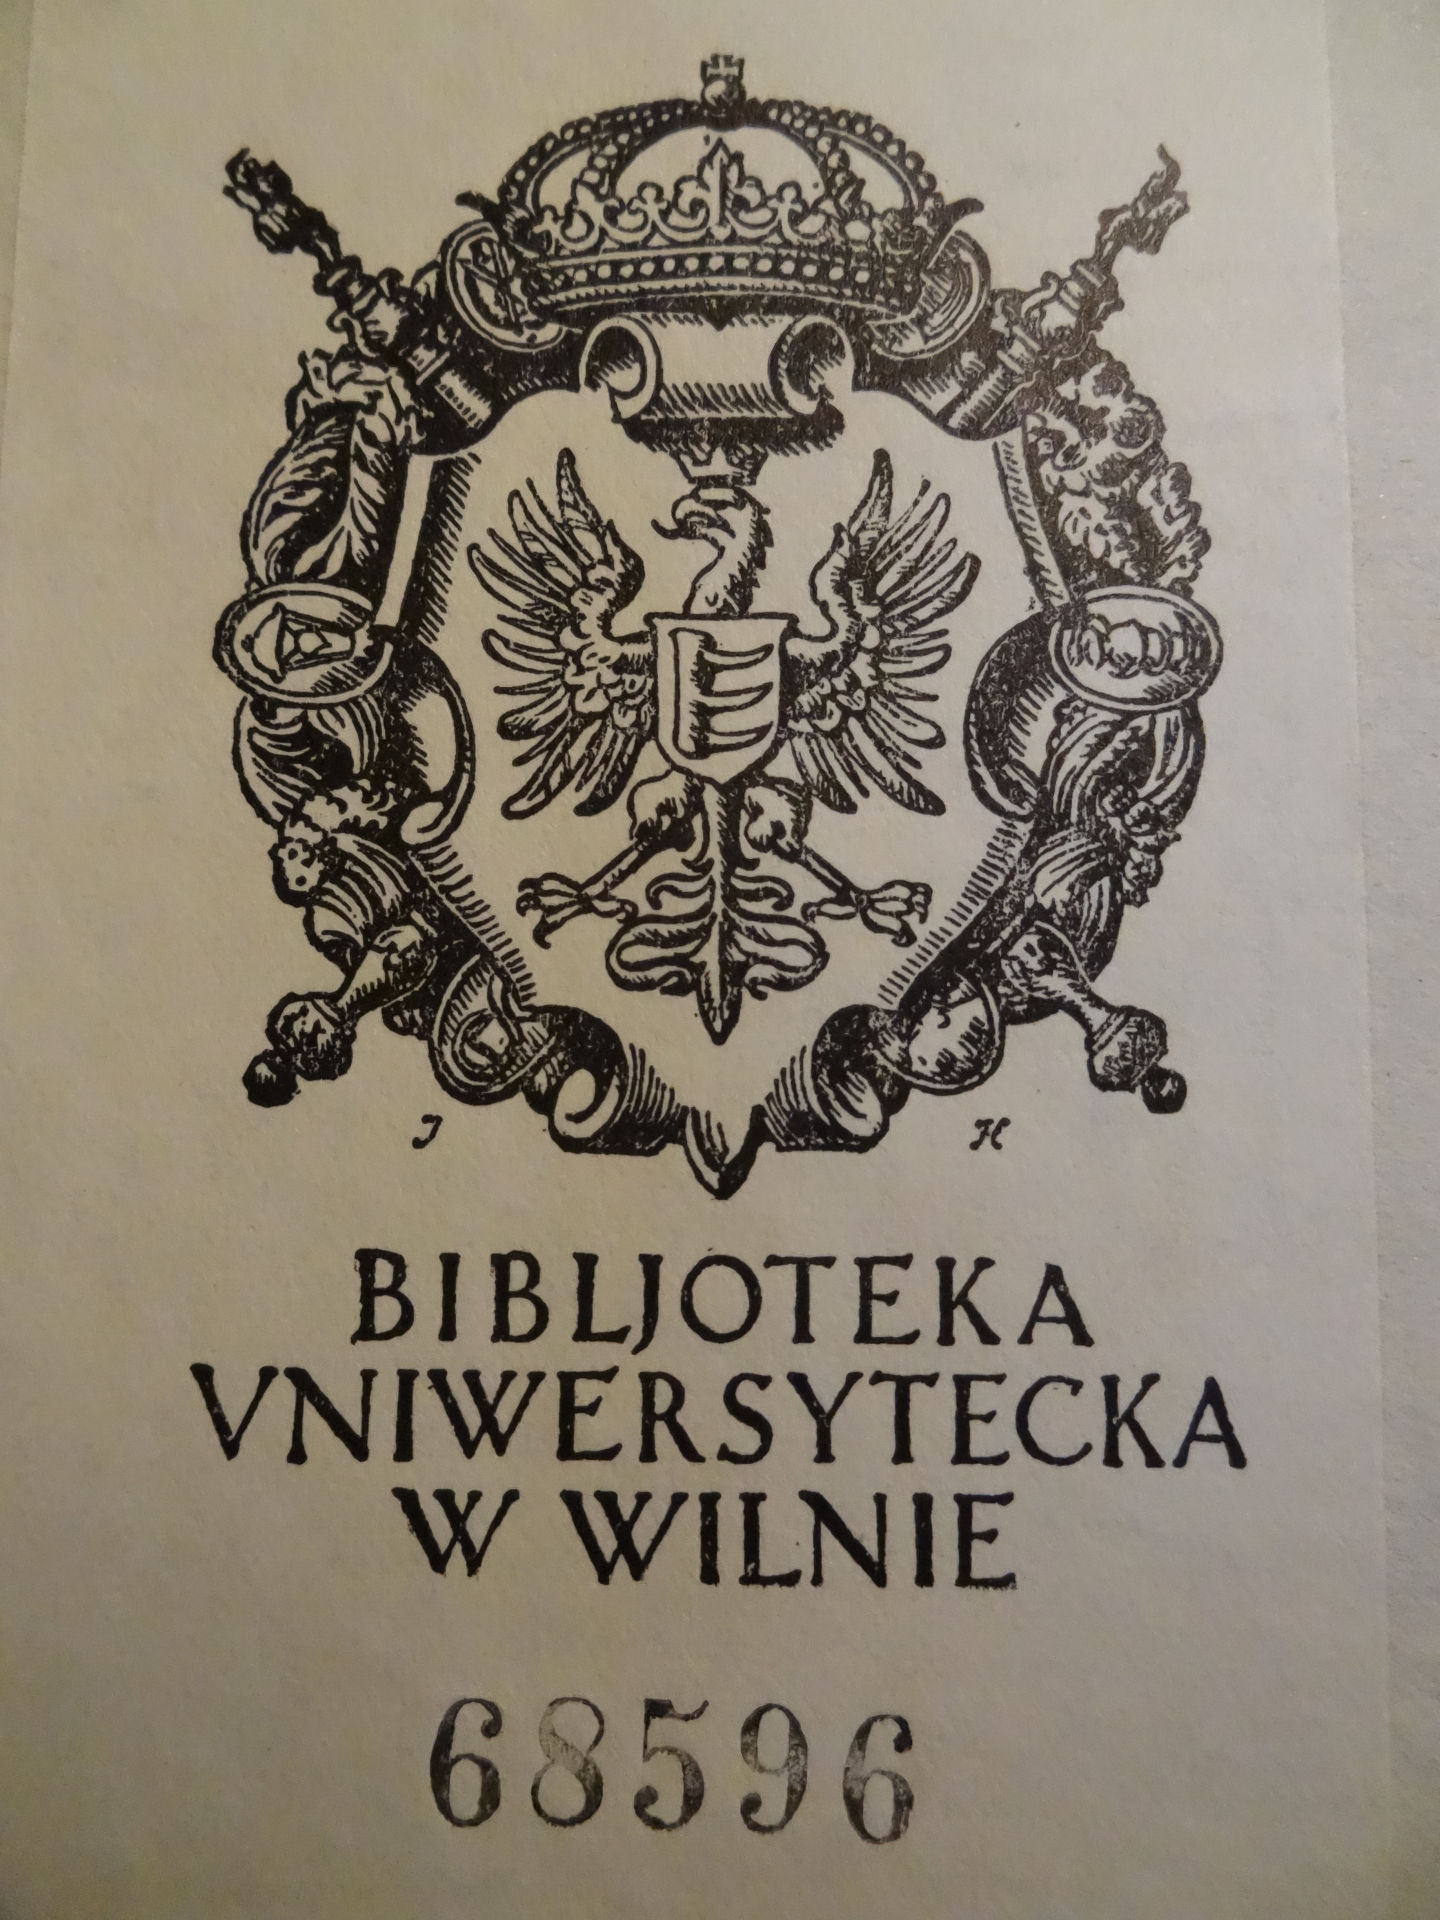 Stamp of the Vilnius University Library (about 1935)